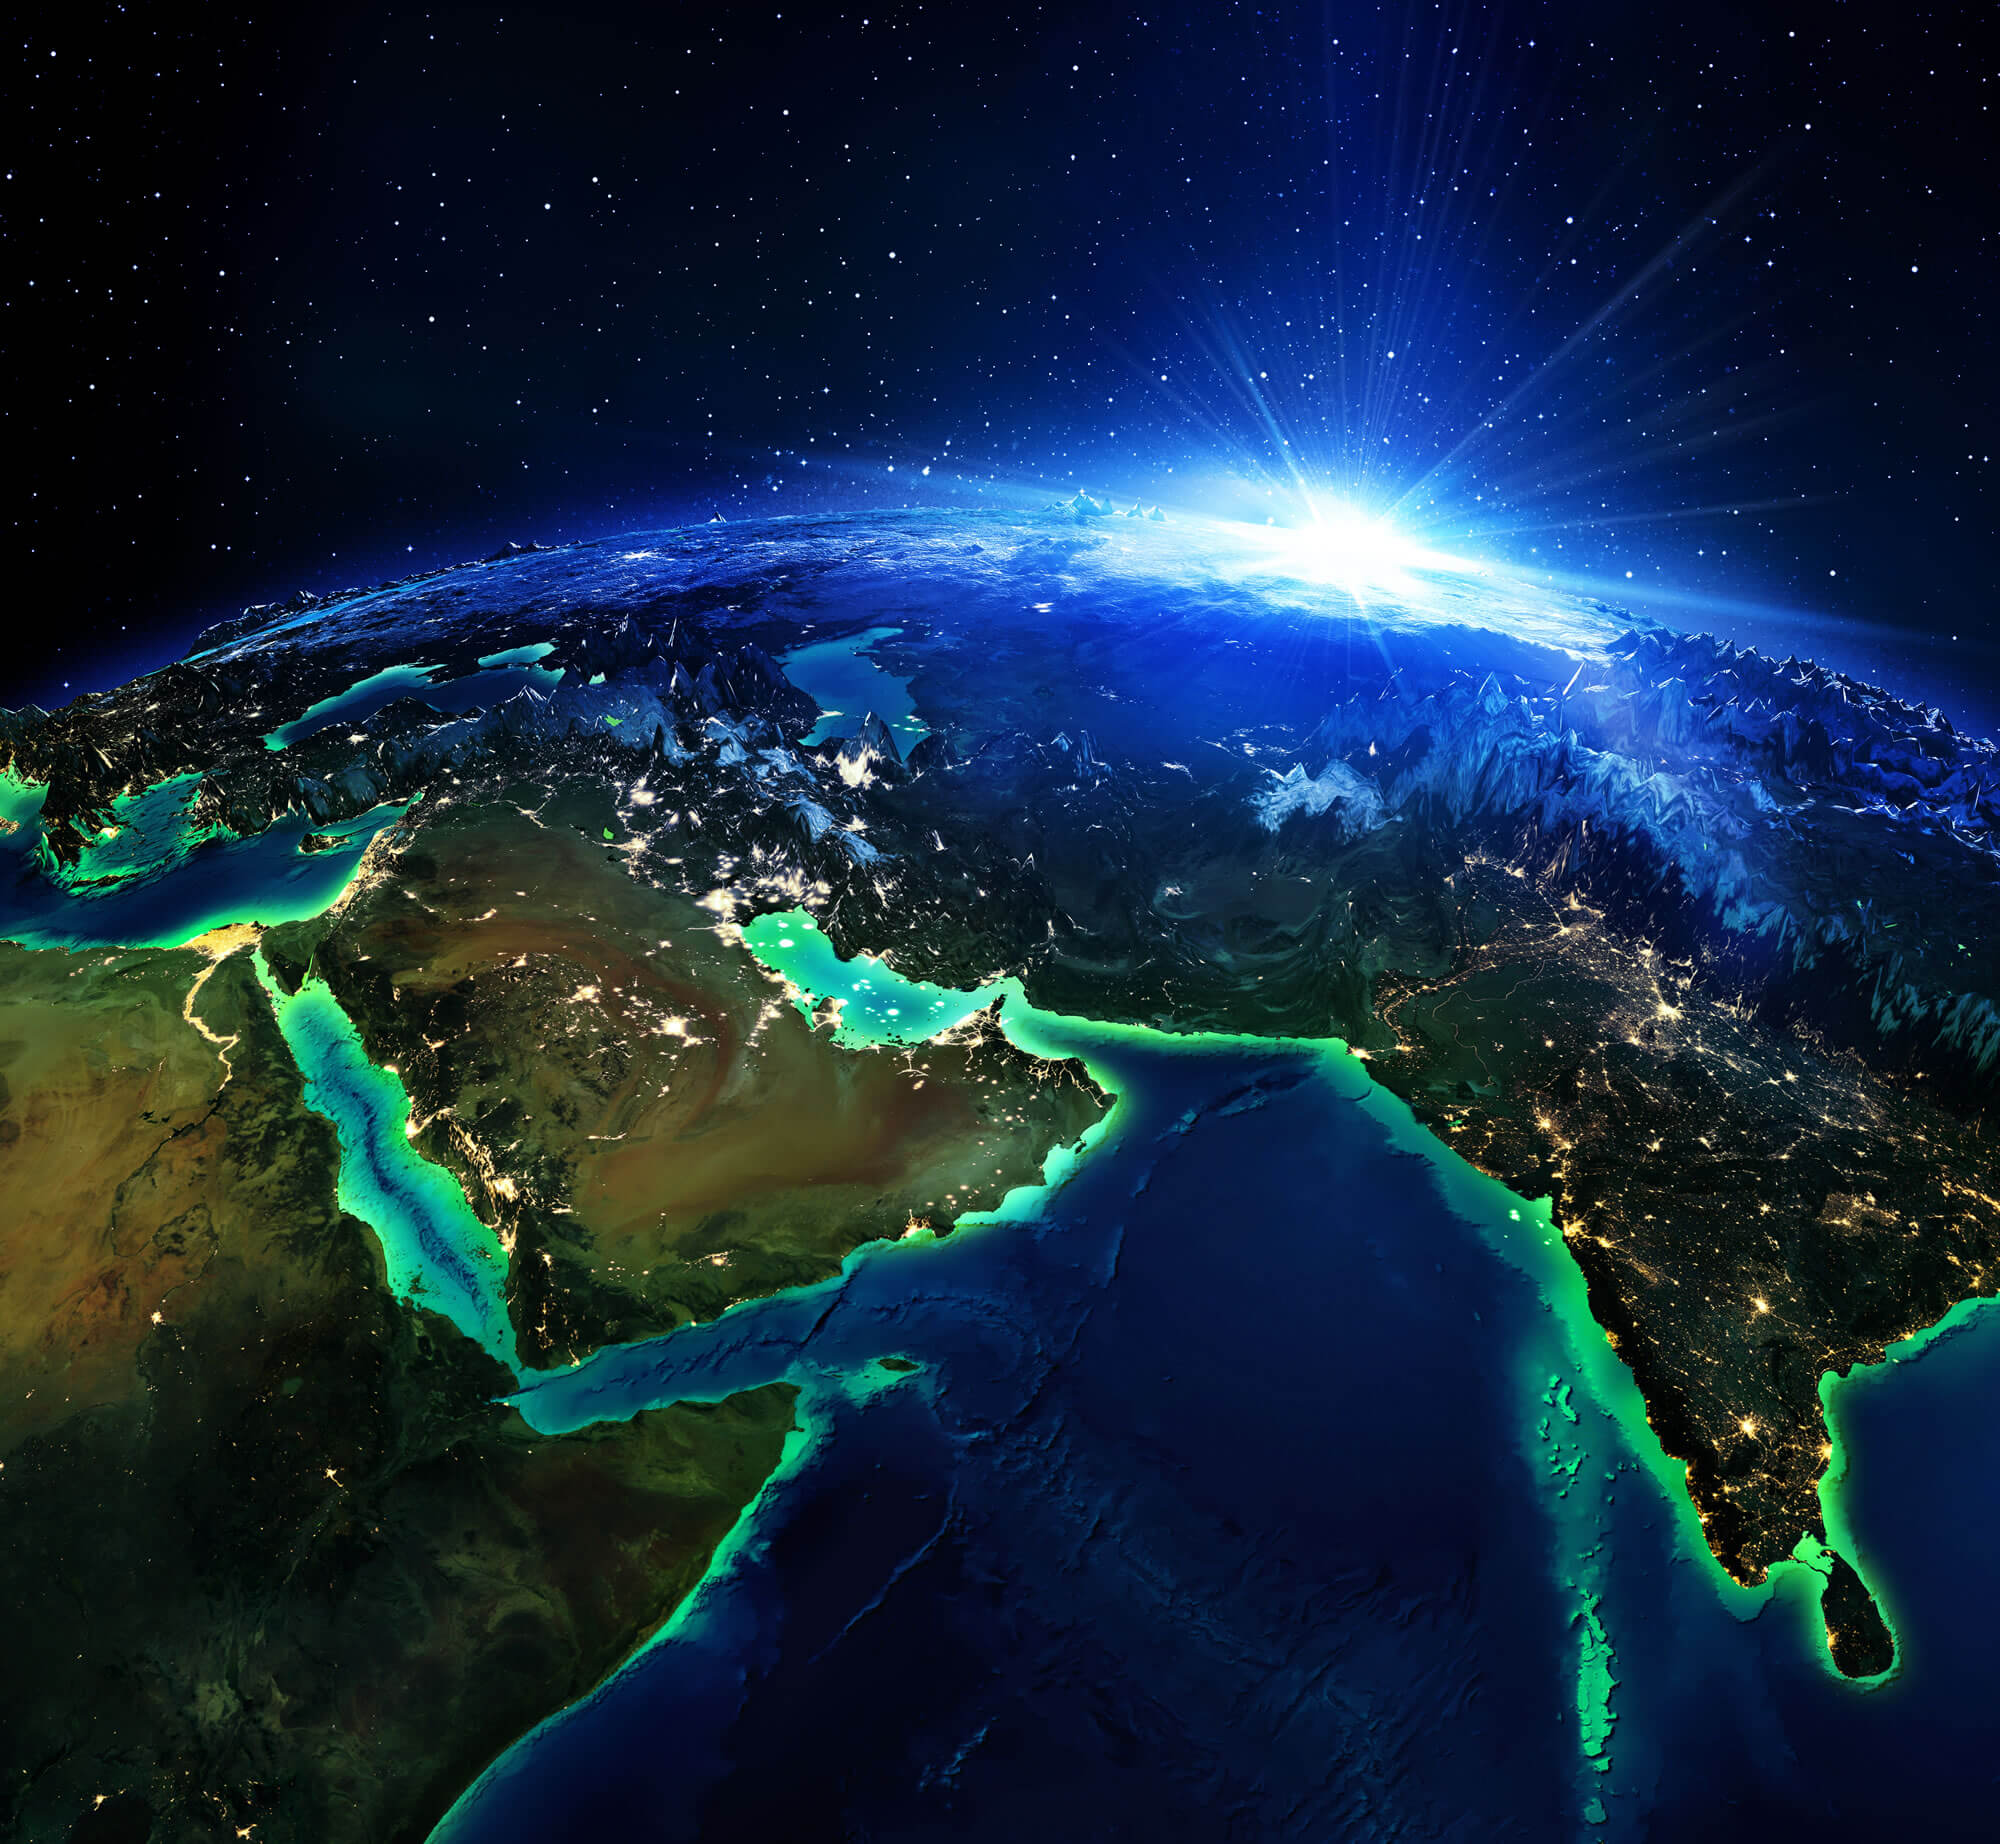 Land area in Arabians, and India the night from Space